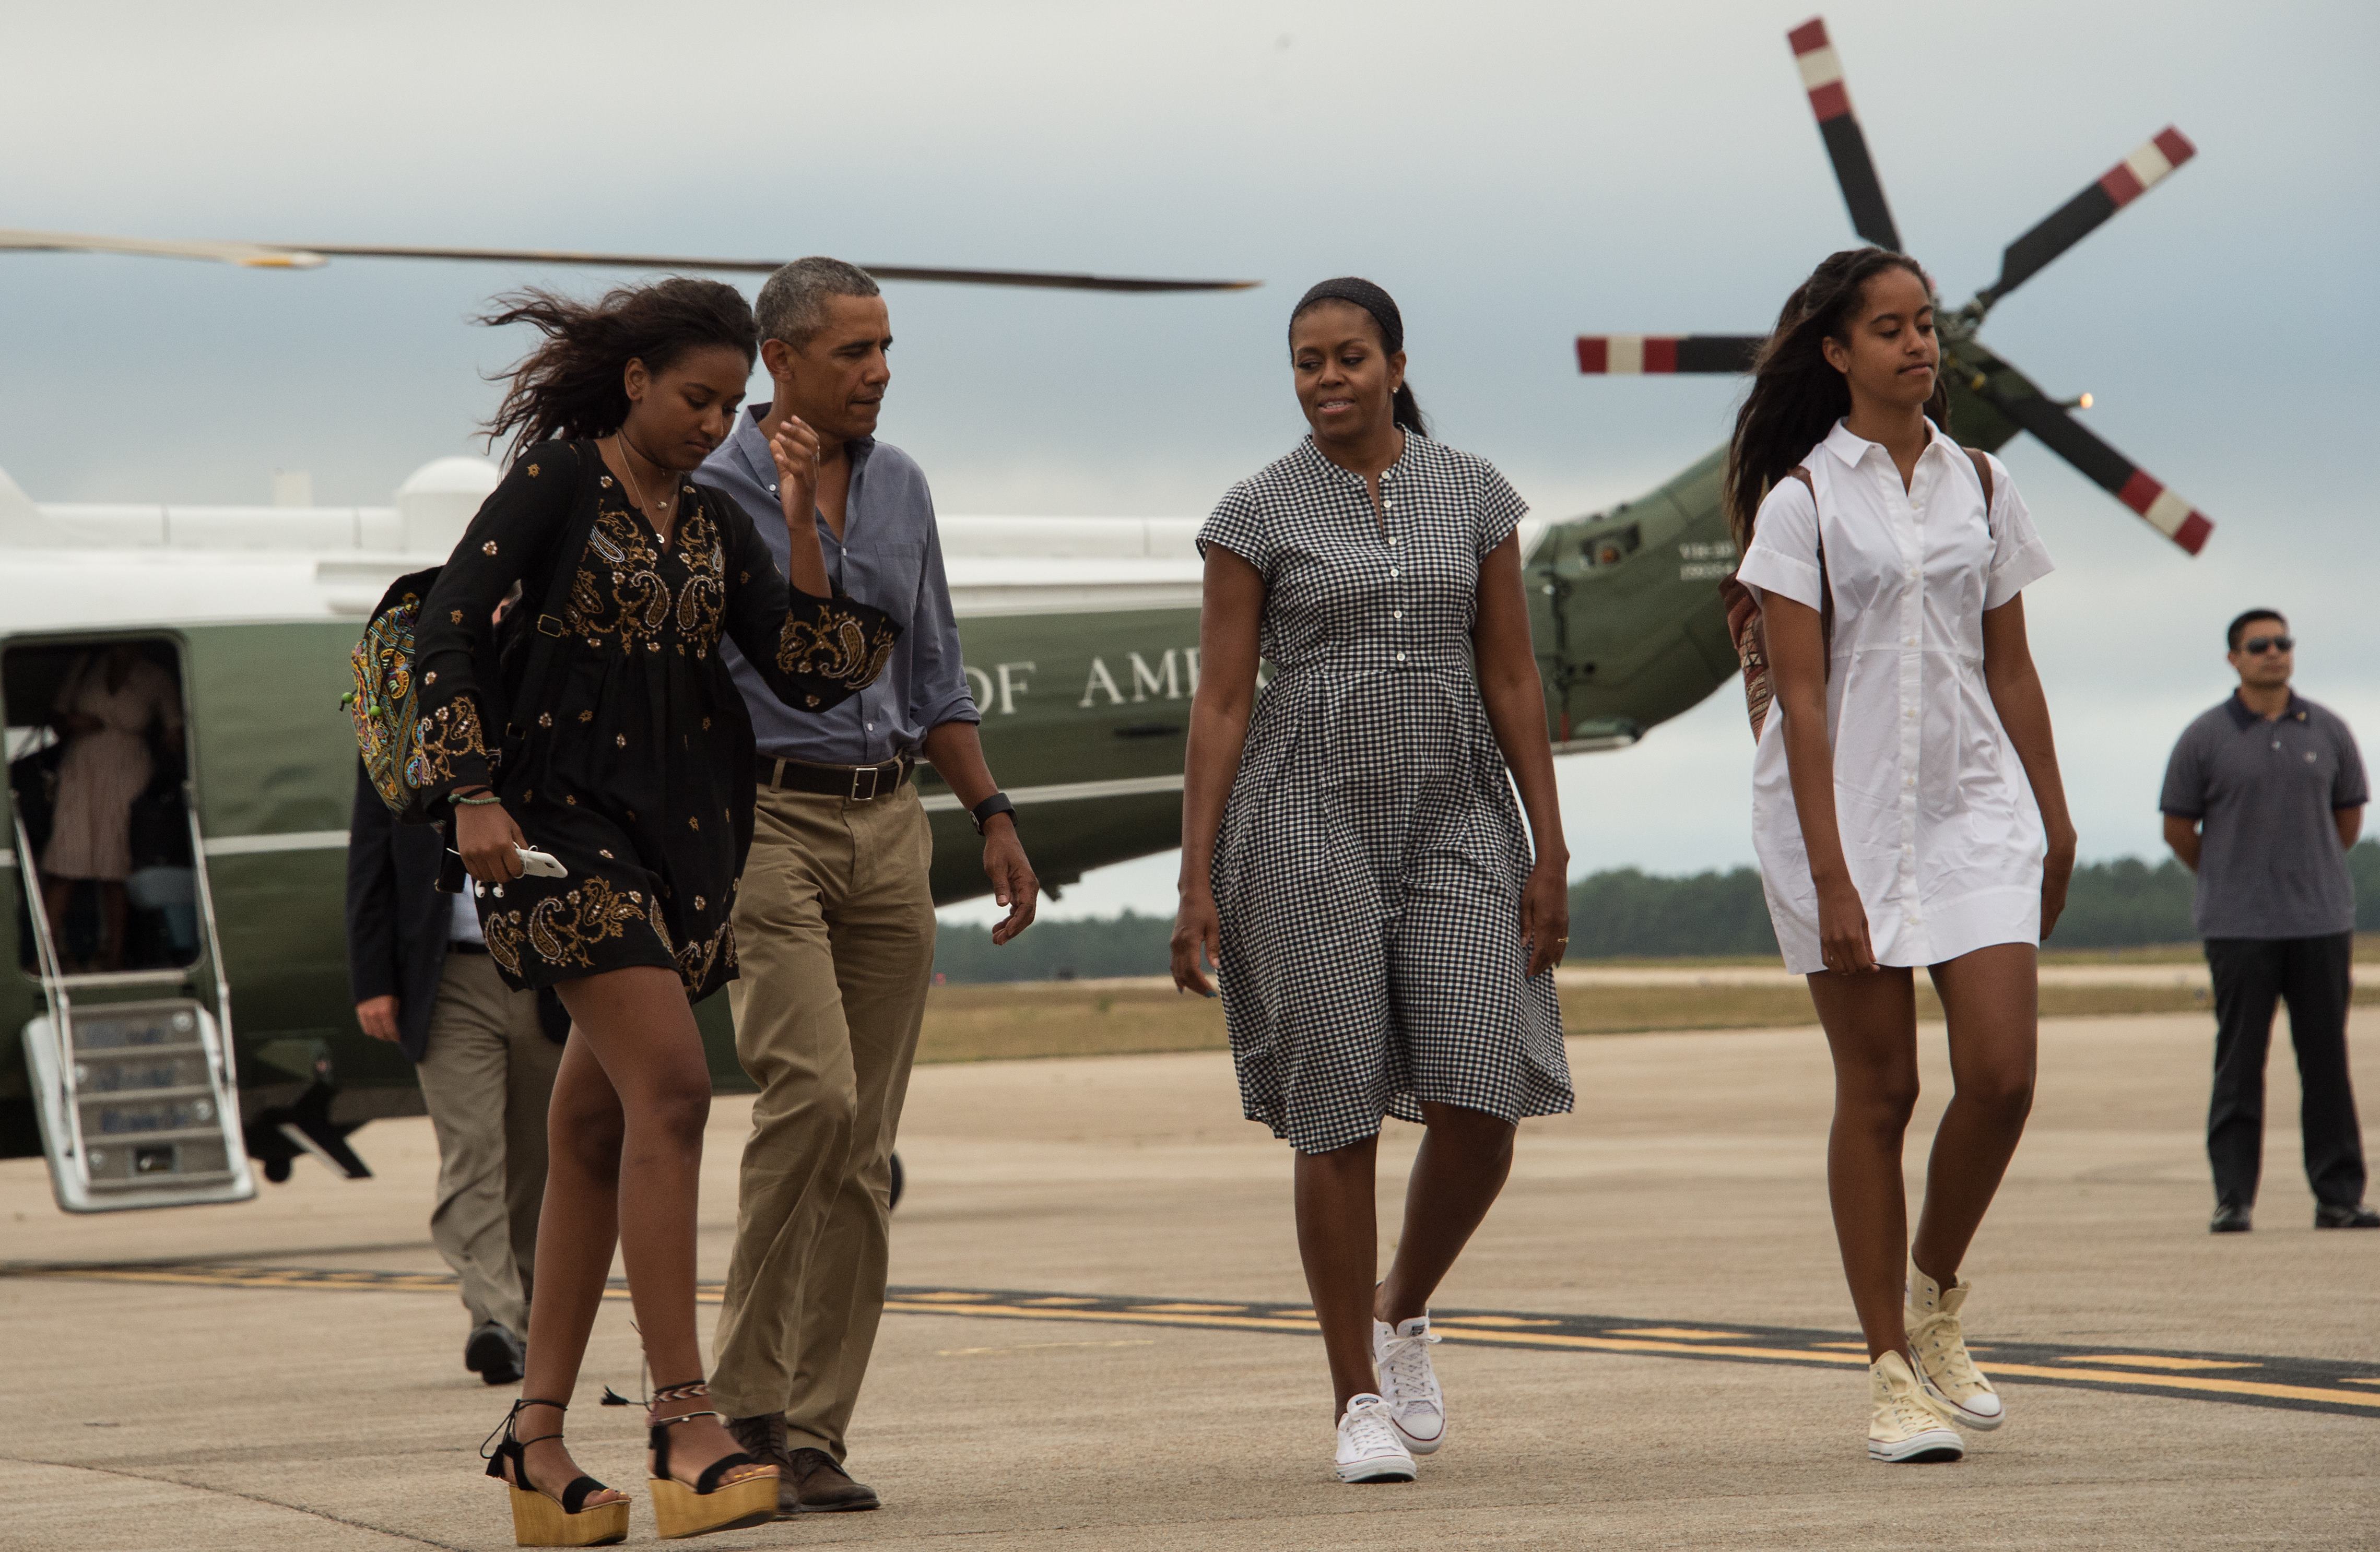 Barack Obama, Michelle Obama, and daughters Malia and Sasha walk to board Air Force One at Cape Cod Air Force Station in Massachusetts on August 21, 2016, as they depart for Washington after a two-week holiday at nearby Martha's Vineyard. | Source: Getty Images